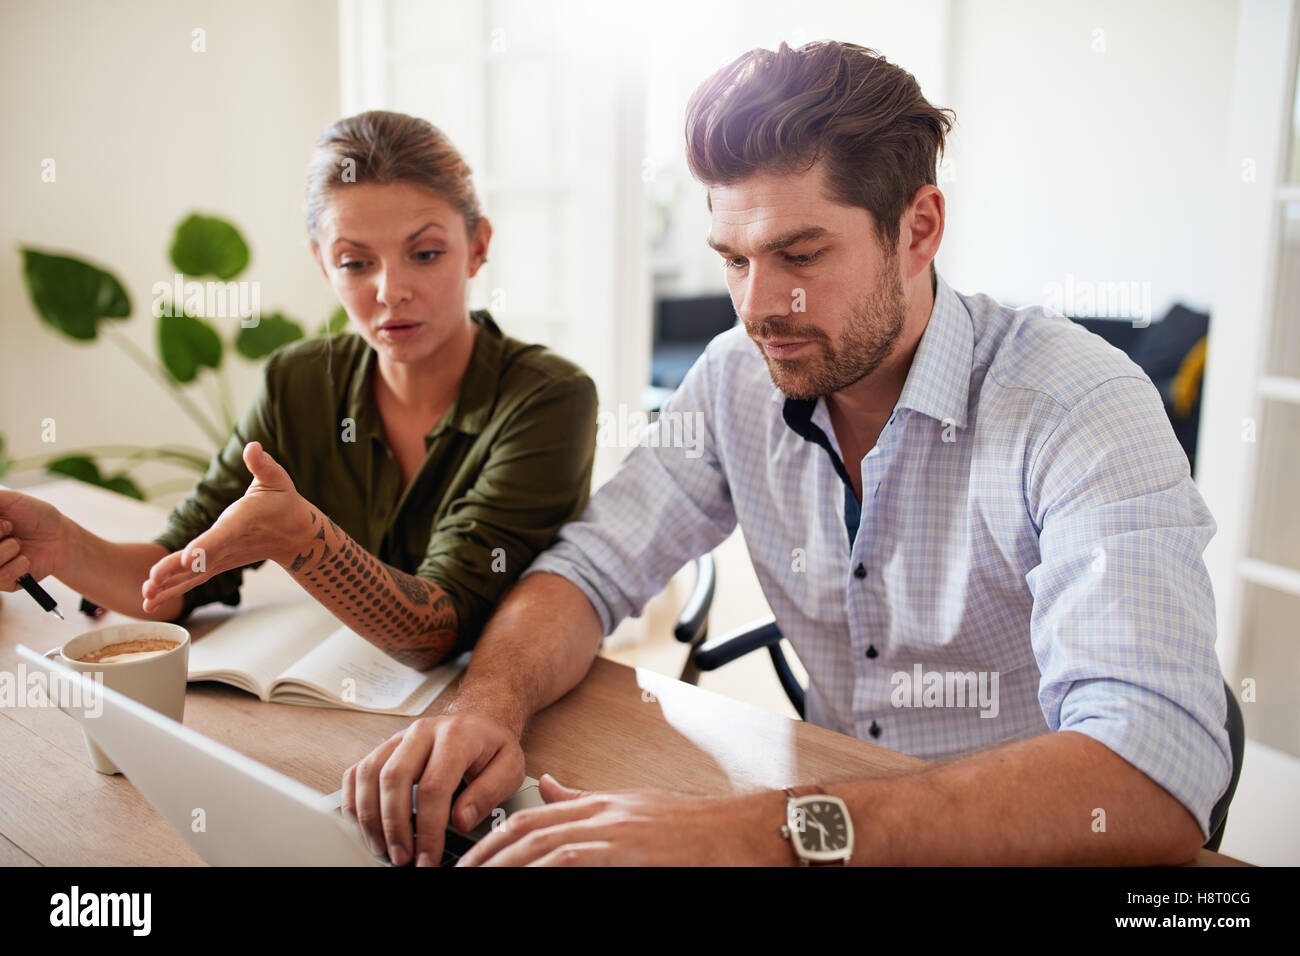 Indoor shot of man and woman sitting at table and working on laptop. Two people using laptop at home office. Stock Photo